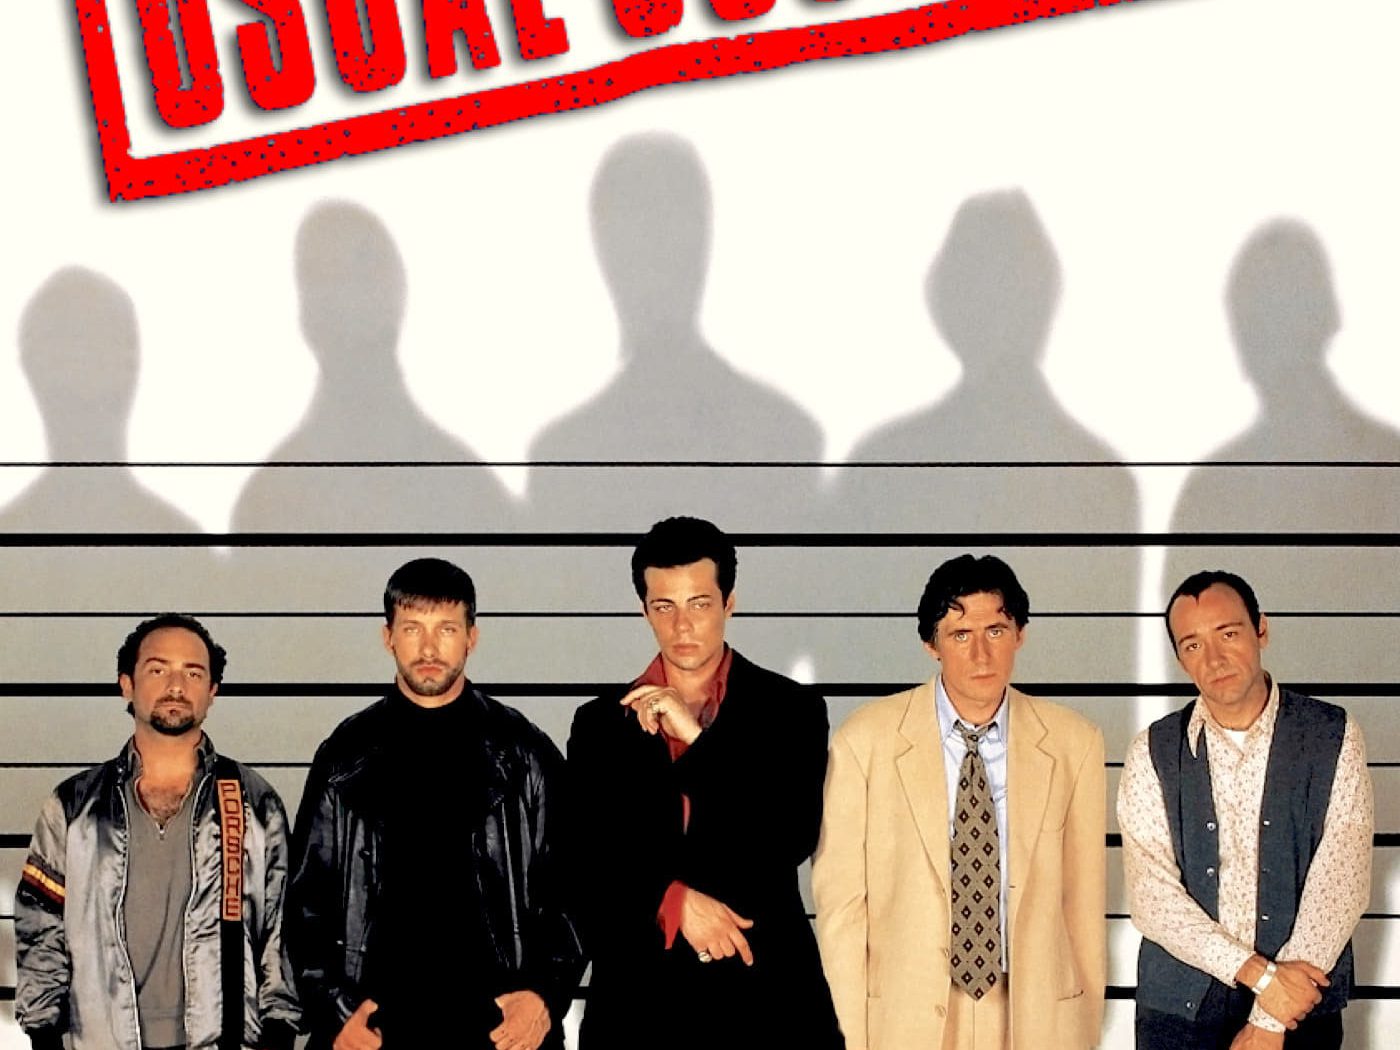 Poster for the movie "The Usual Suspects"